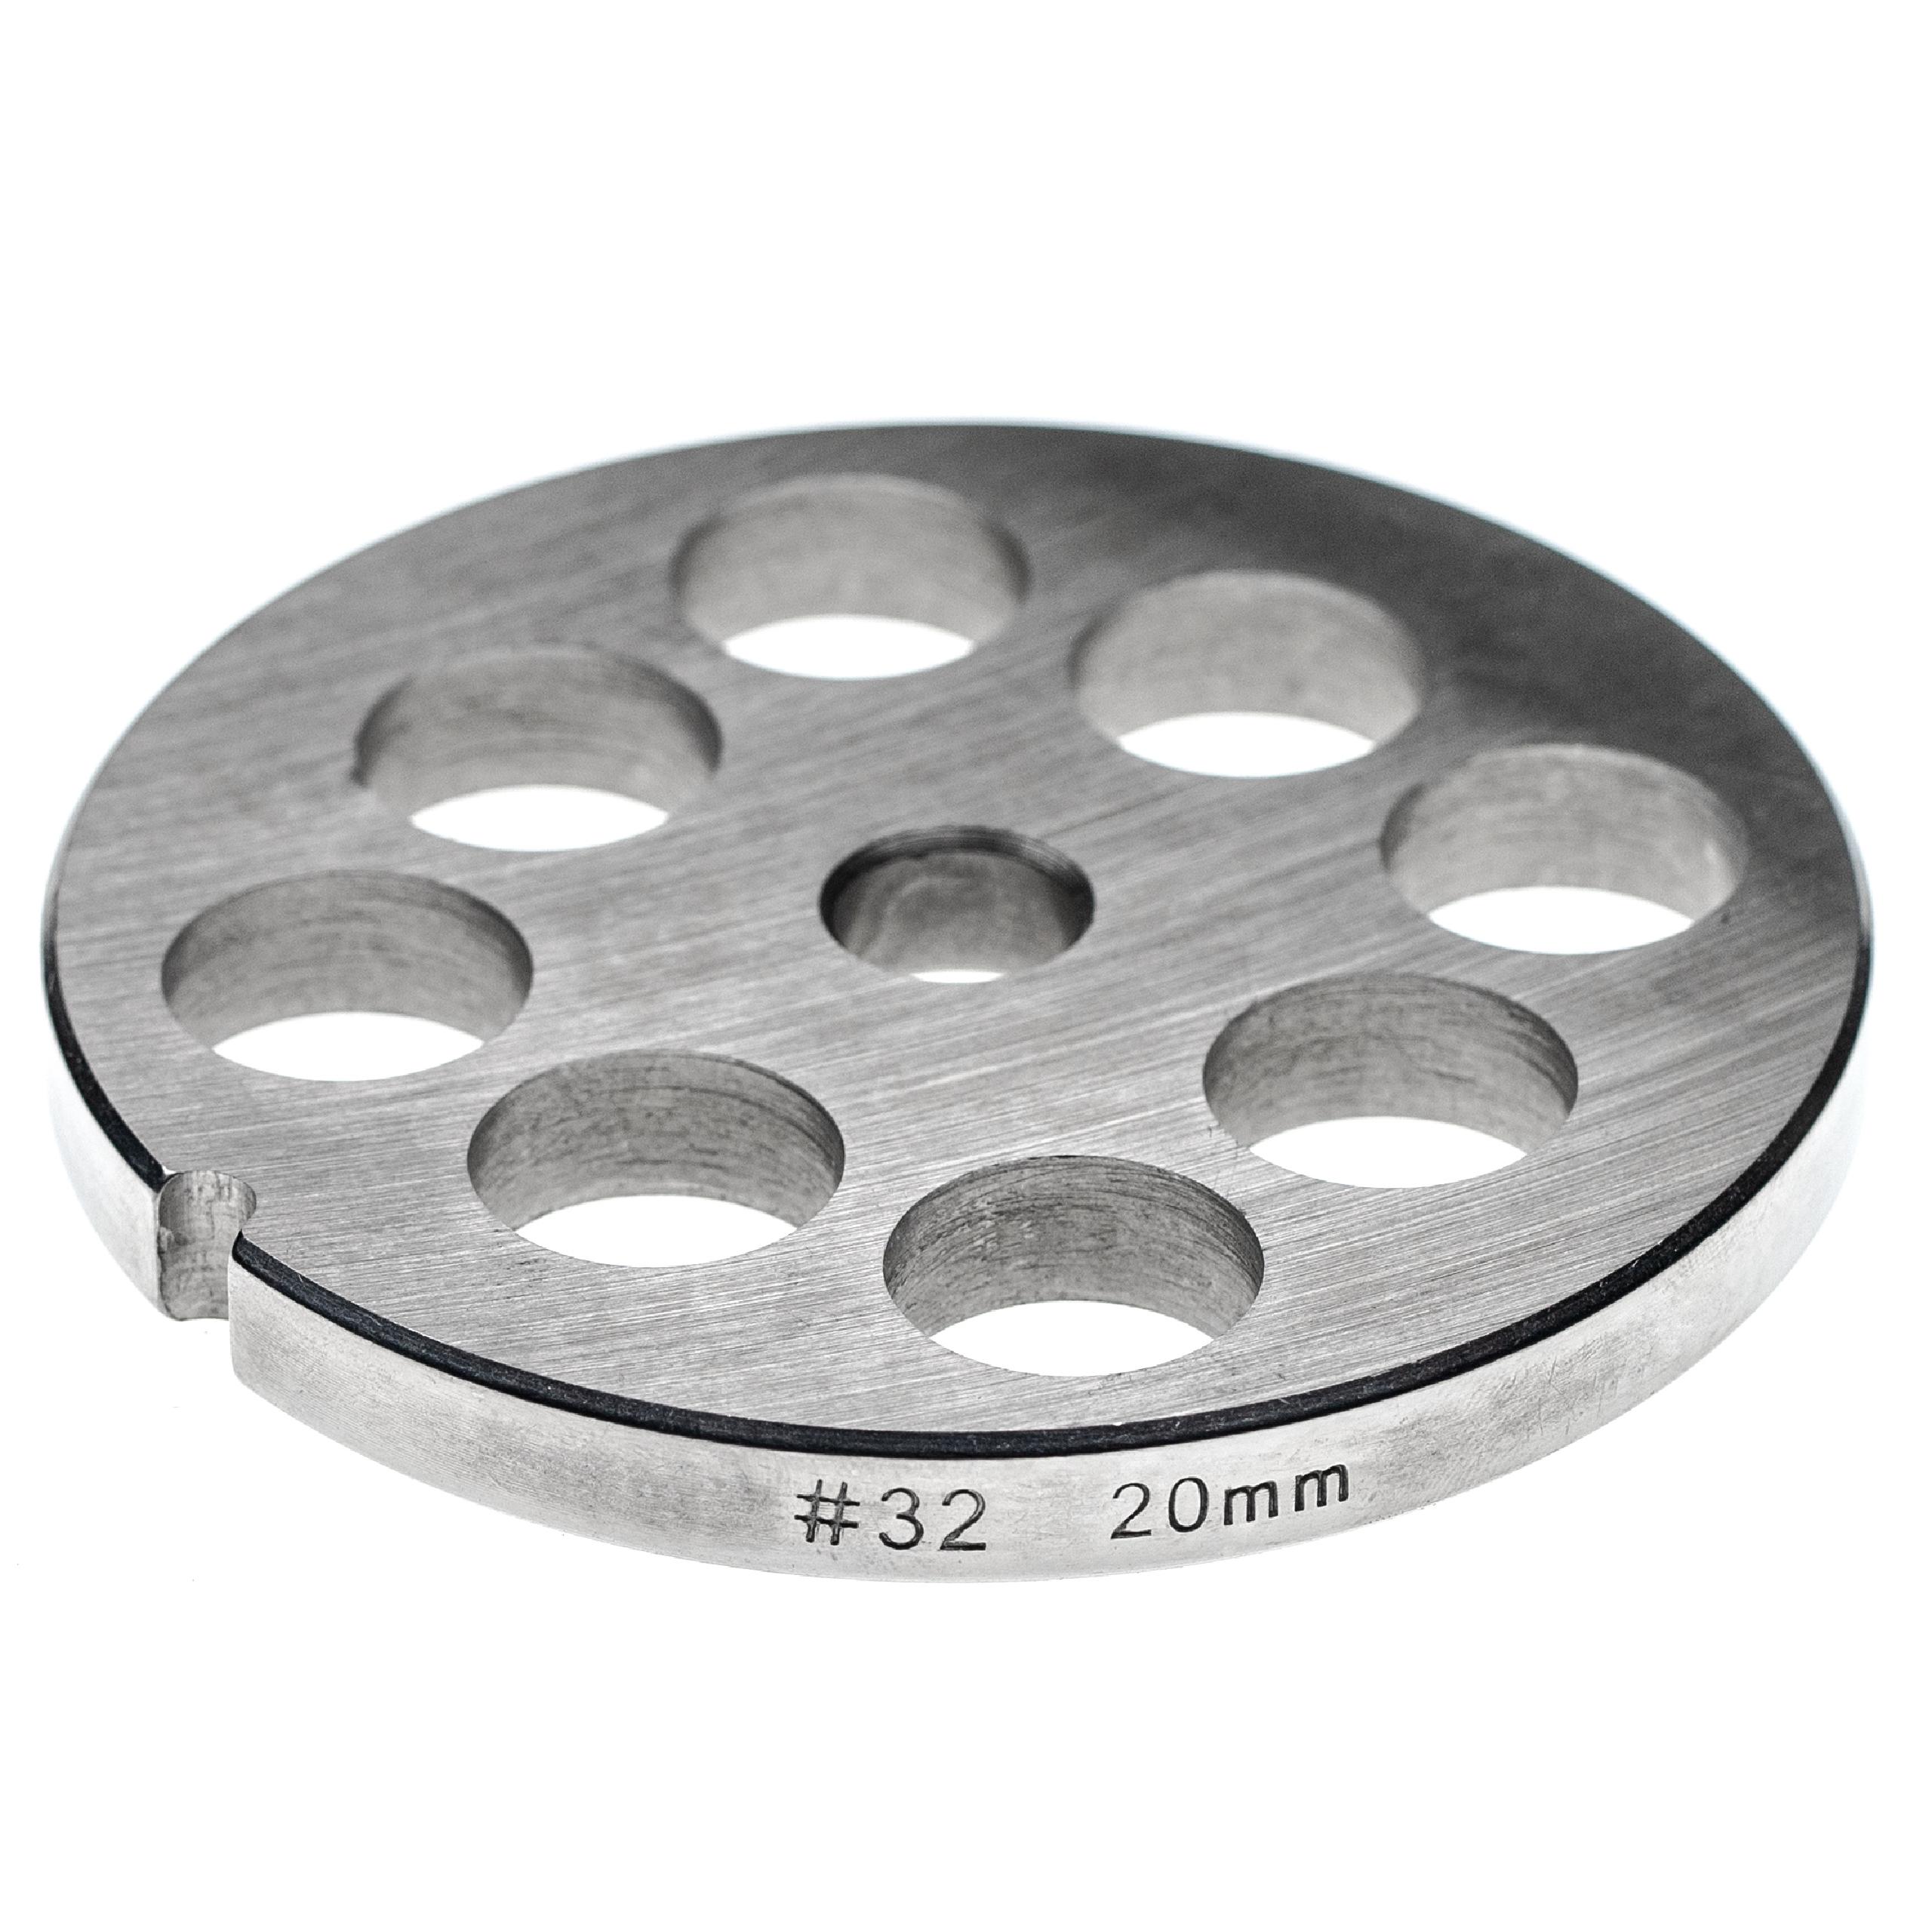 Meat Grinder Disc Size 32 for ADE, Caso, Fama, KBS, Porkert Food Mincer etc. - ⌀ 20 mm hole, stainless steel